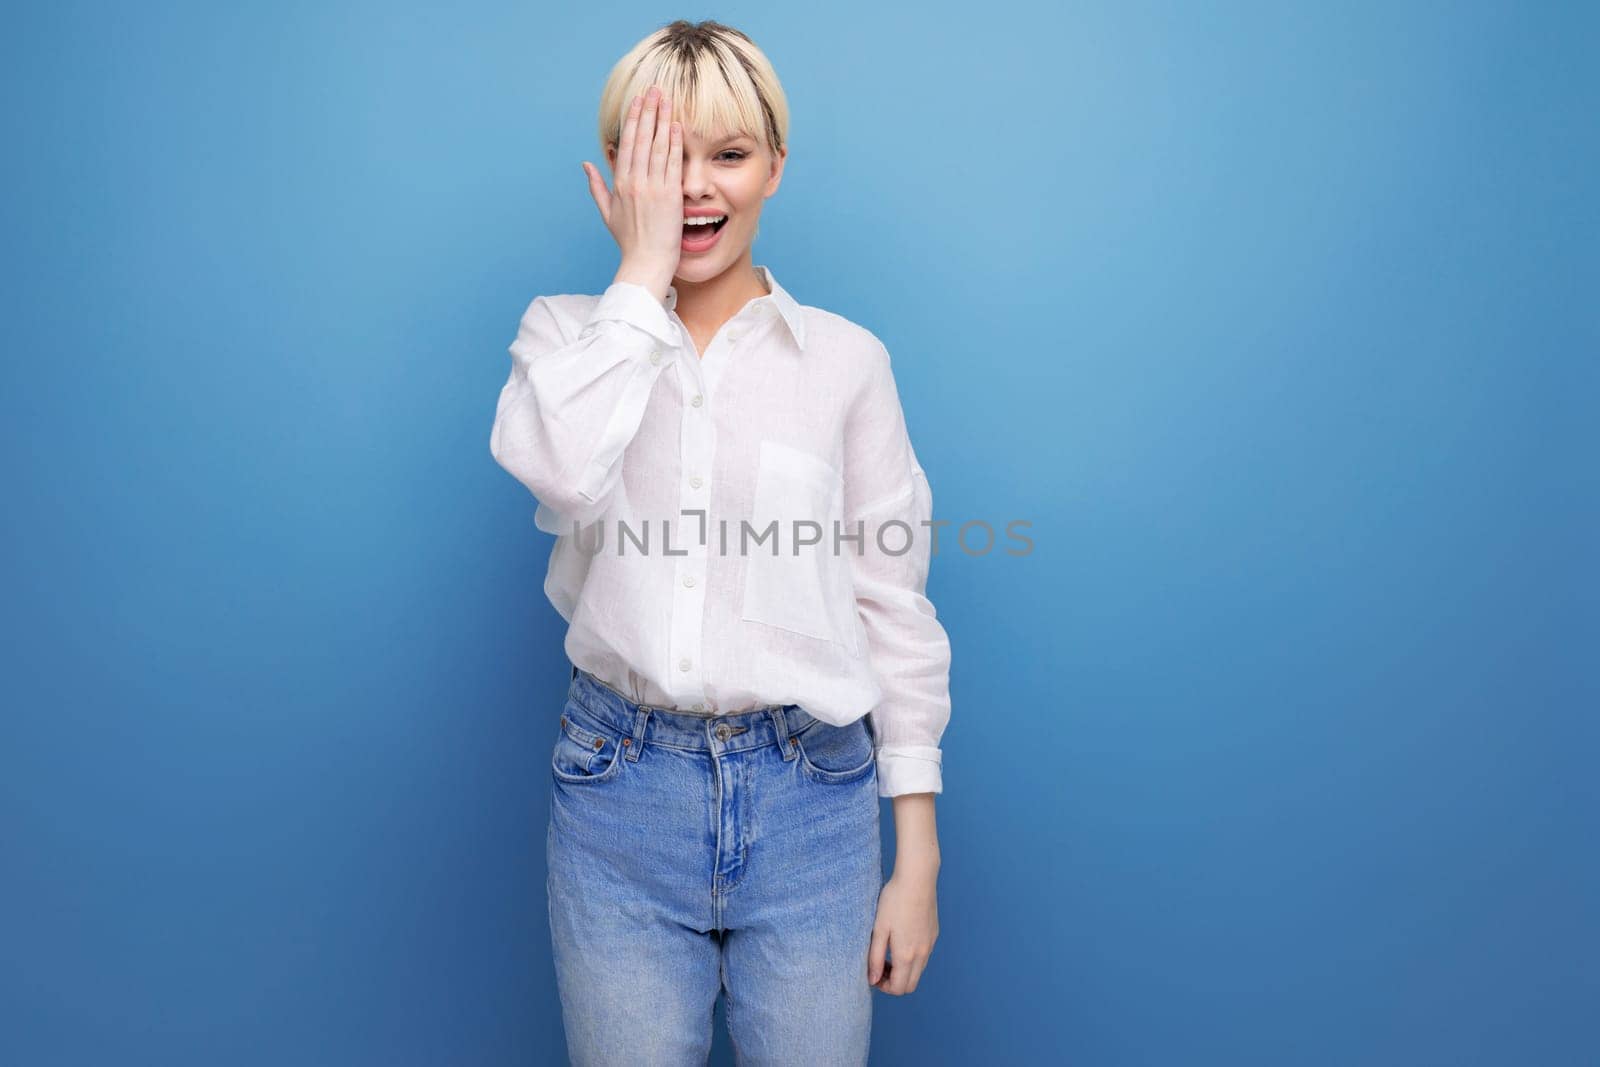 young caucasian woman with a short haircut is dressed in a white shirt on background with copy space. people lifestyle concept.